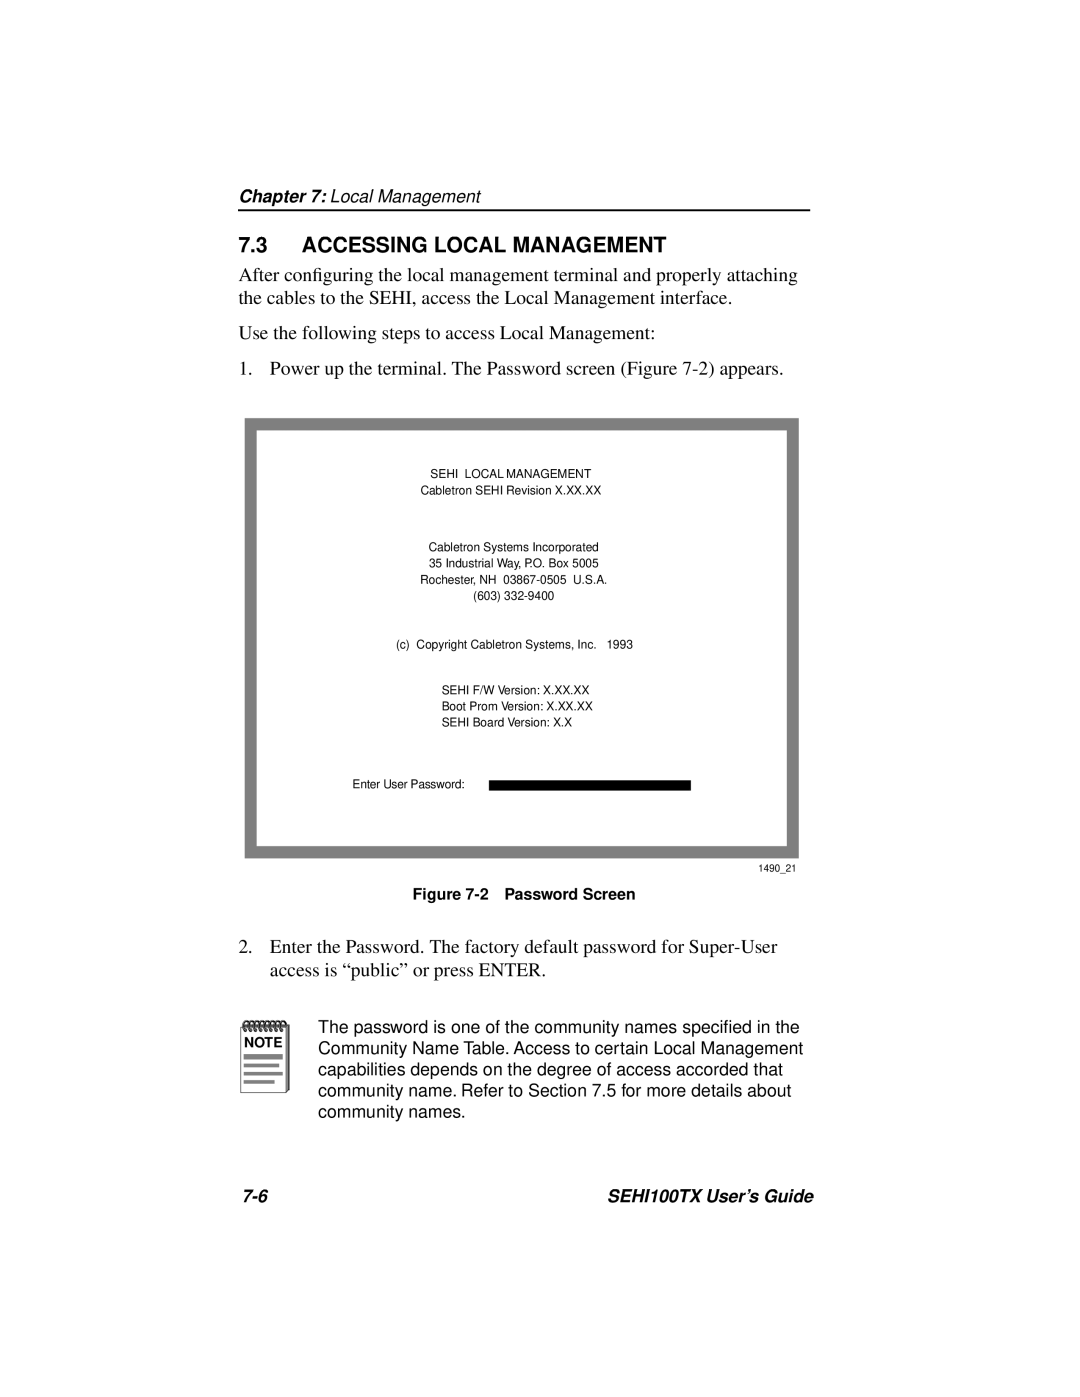 Cabletron Systems SEHI100TX-22 manual Accessing Local Management 